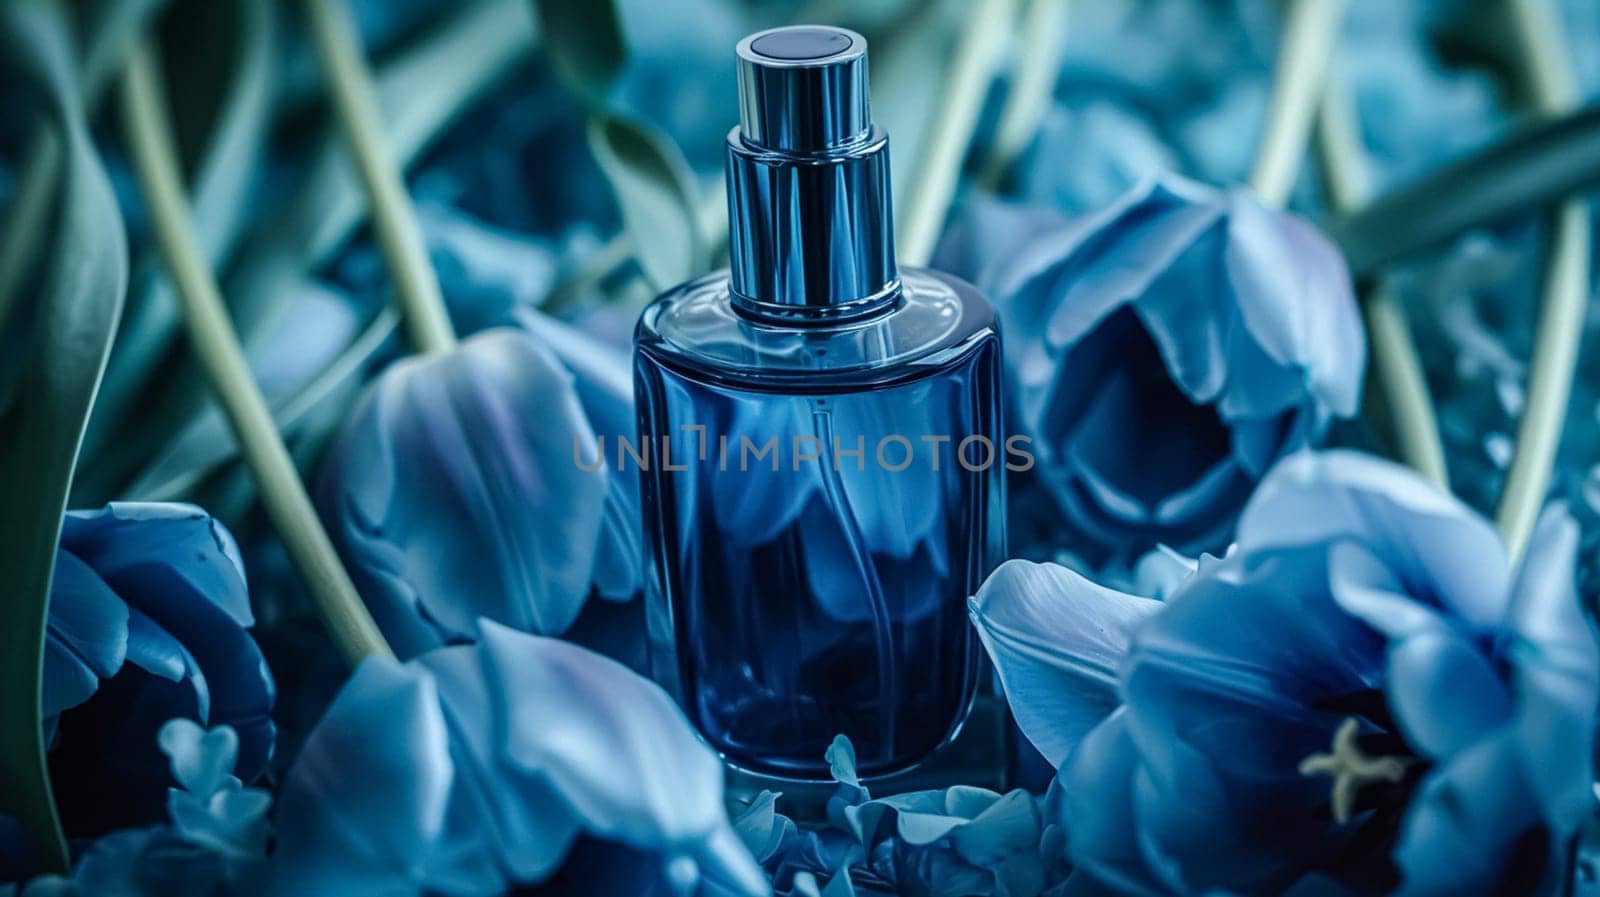 Perfume bottle with beautiful flowers. Floral background. Beauty concept. Flat lay, top view.